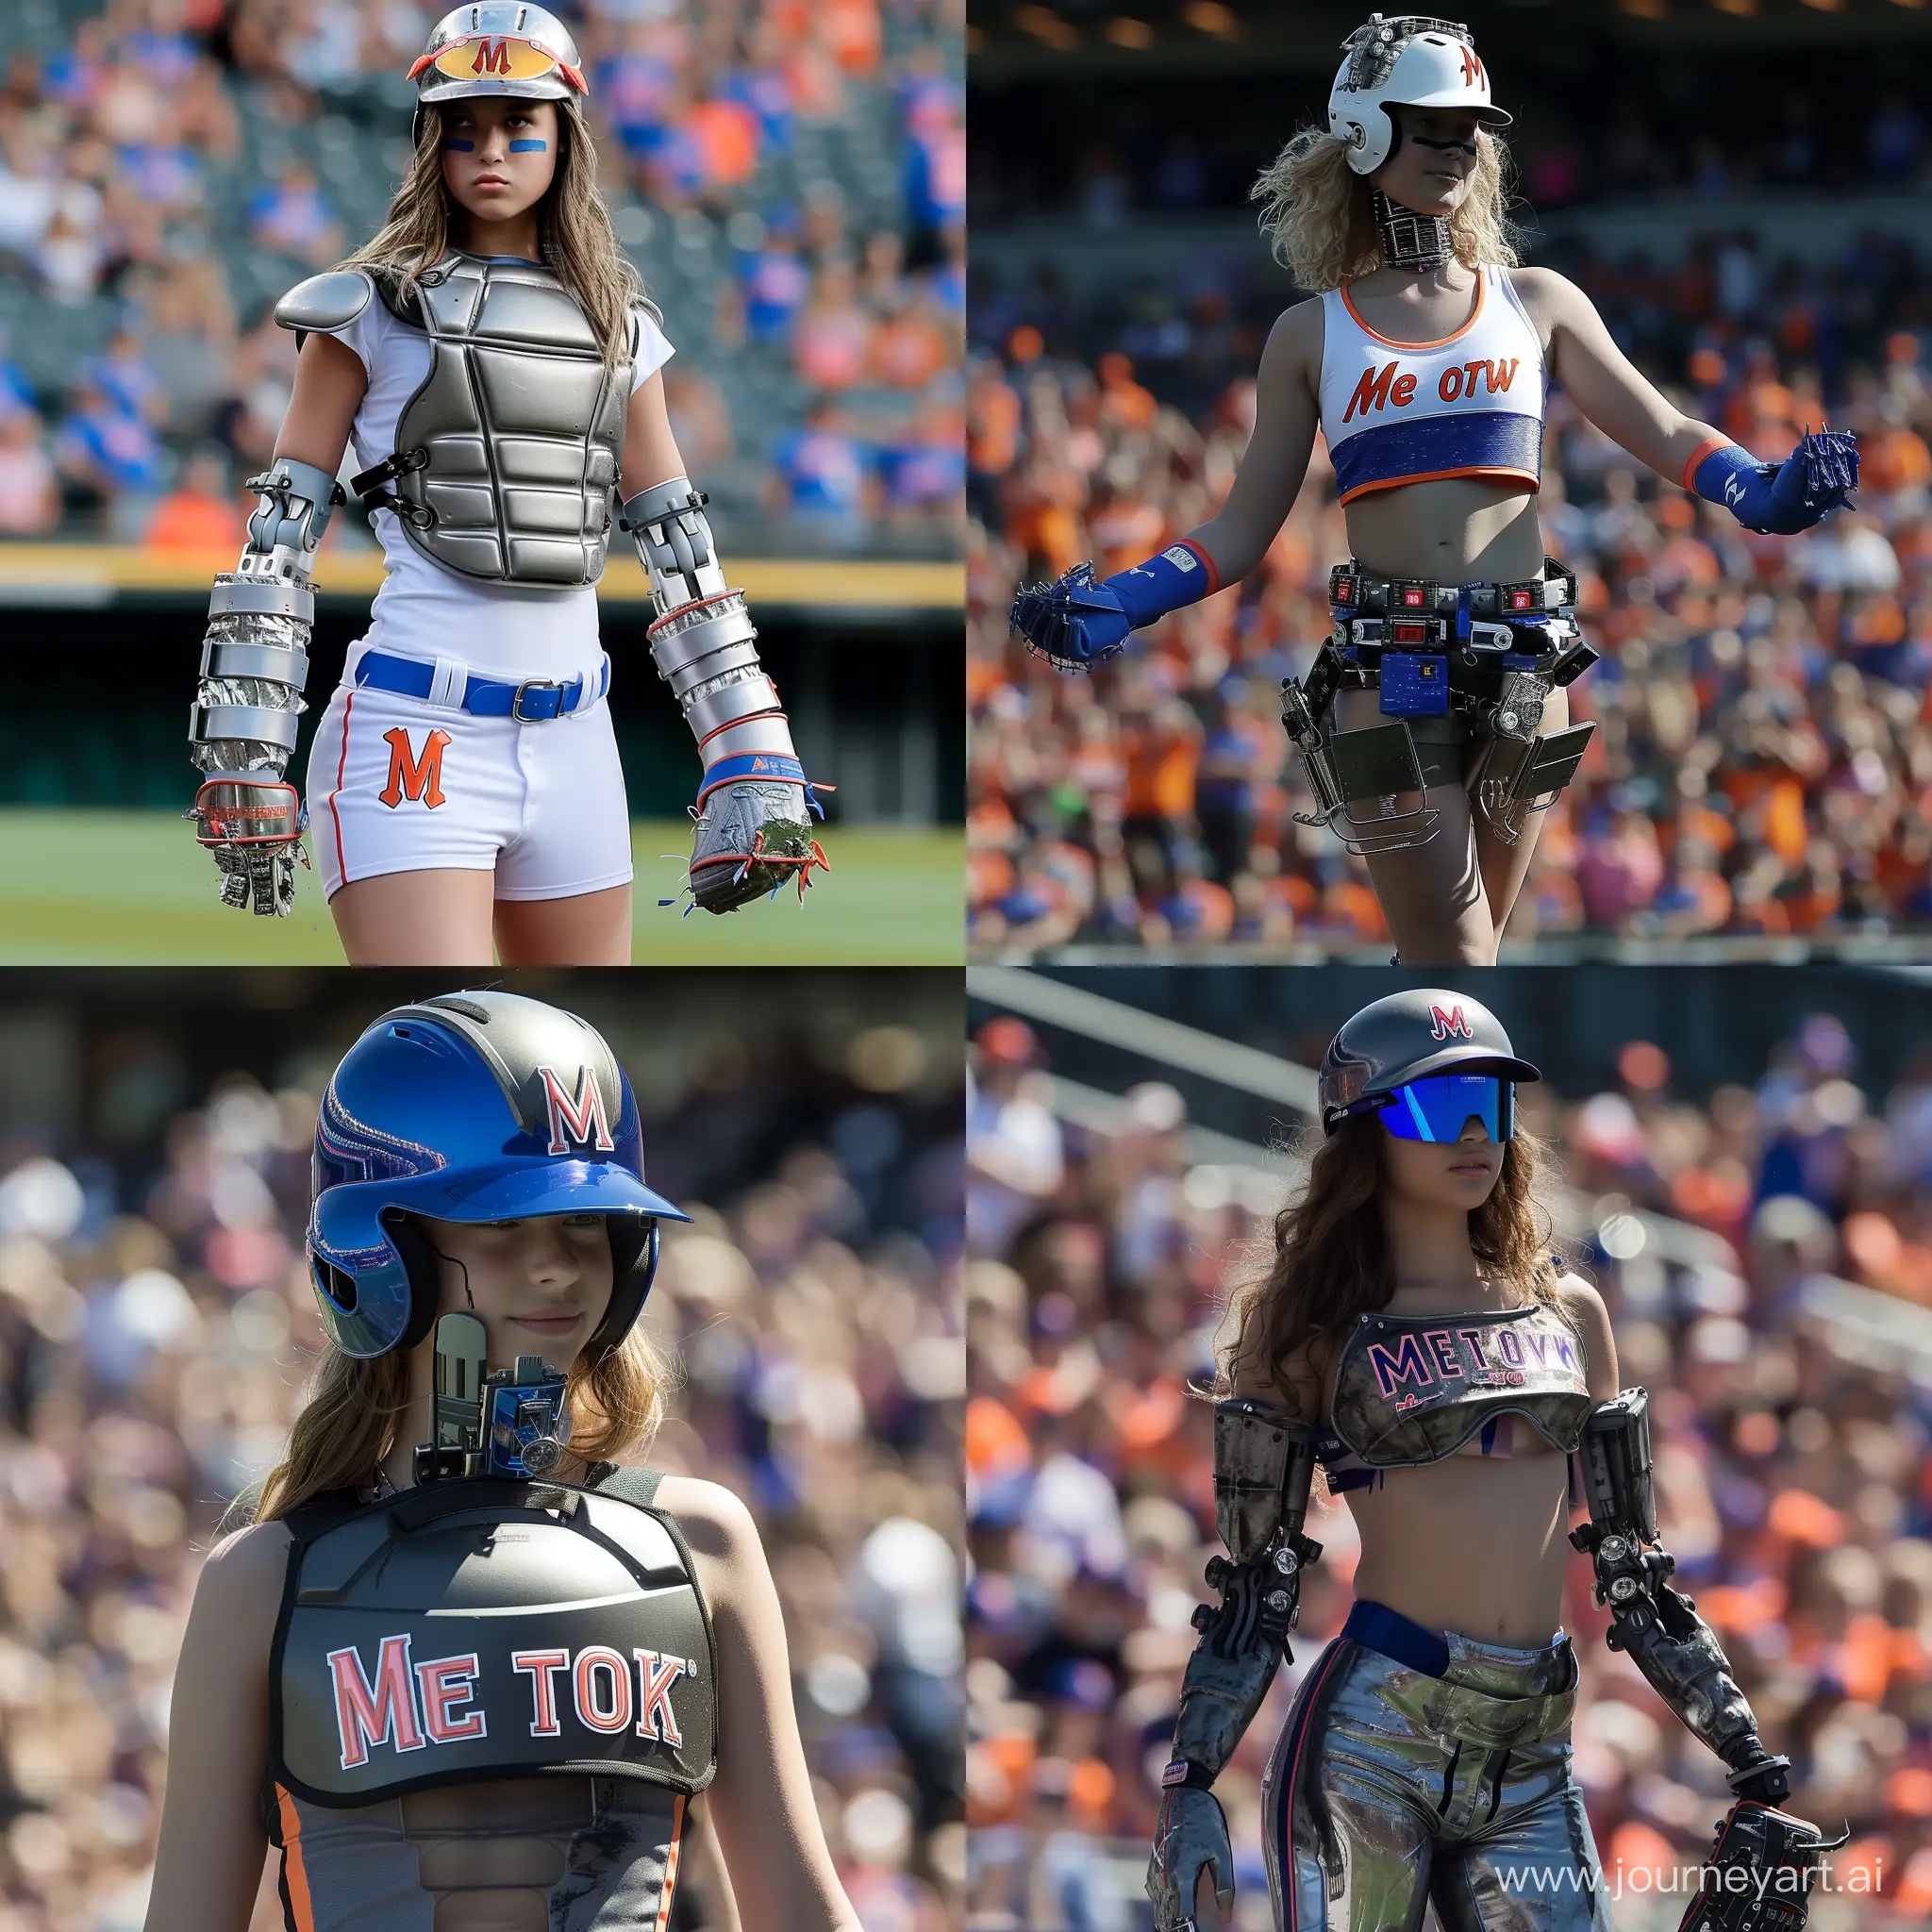 New York Mets 13-14 year old cheerleader, turns out to be a robot, malfunctioning